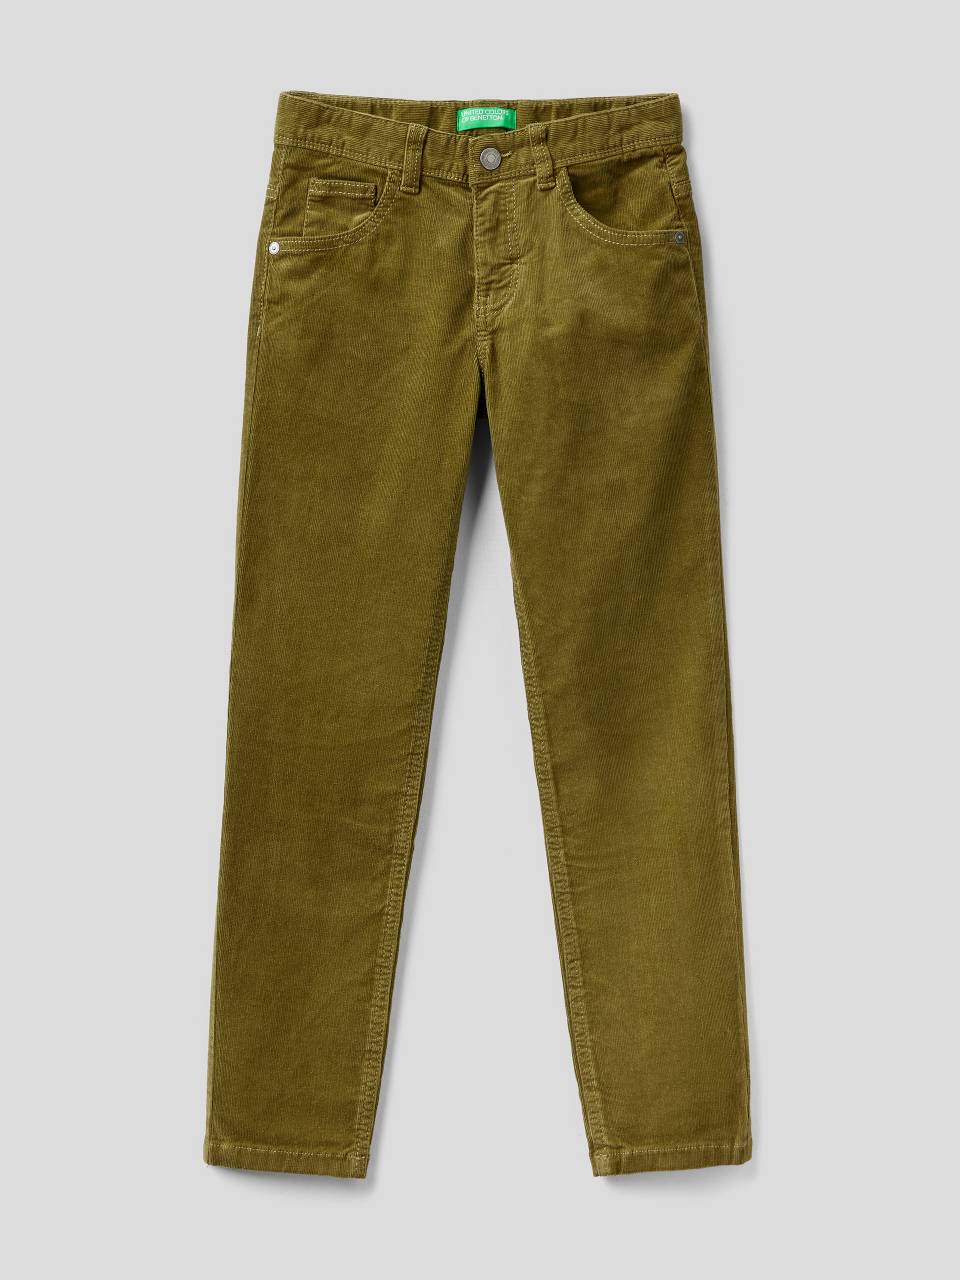 Buy GAS Olive Green Noley Fit Corduroy Trousers - Trousers for Men 1174092  | Myntra